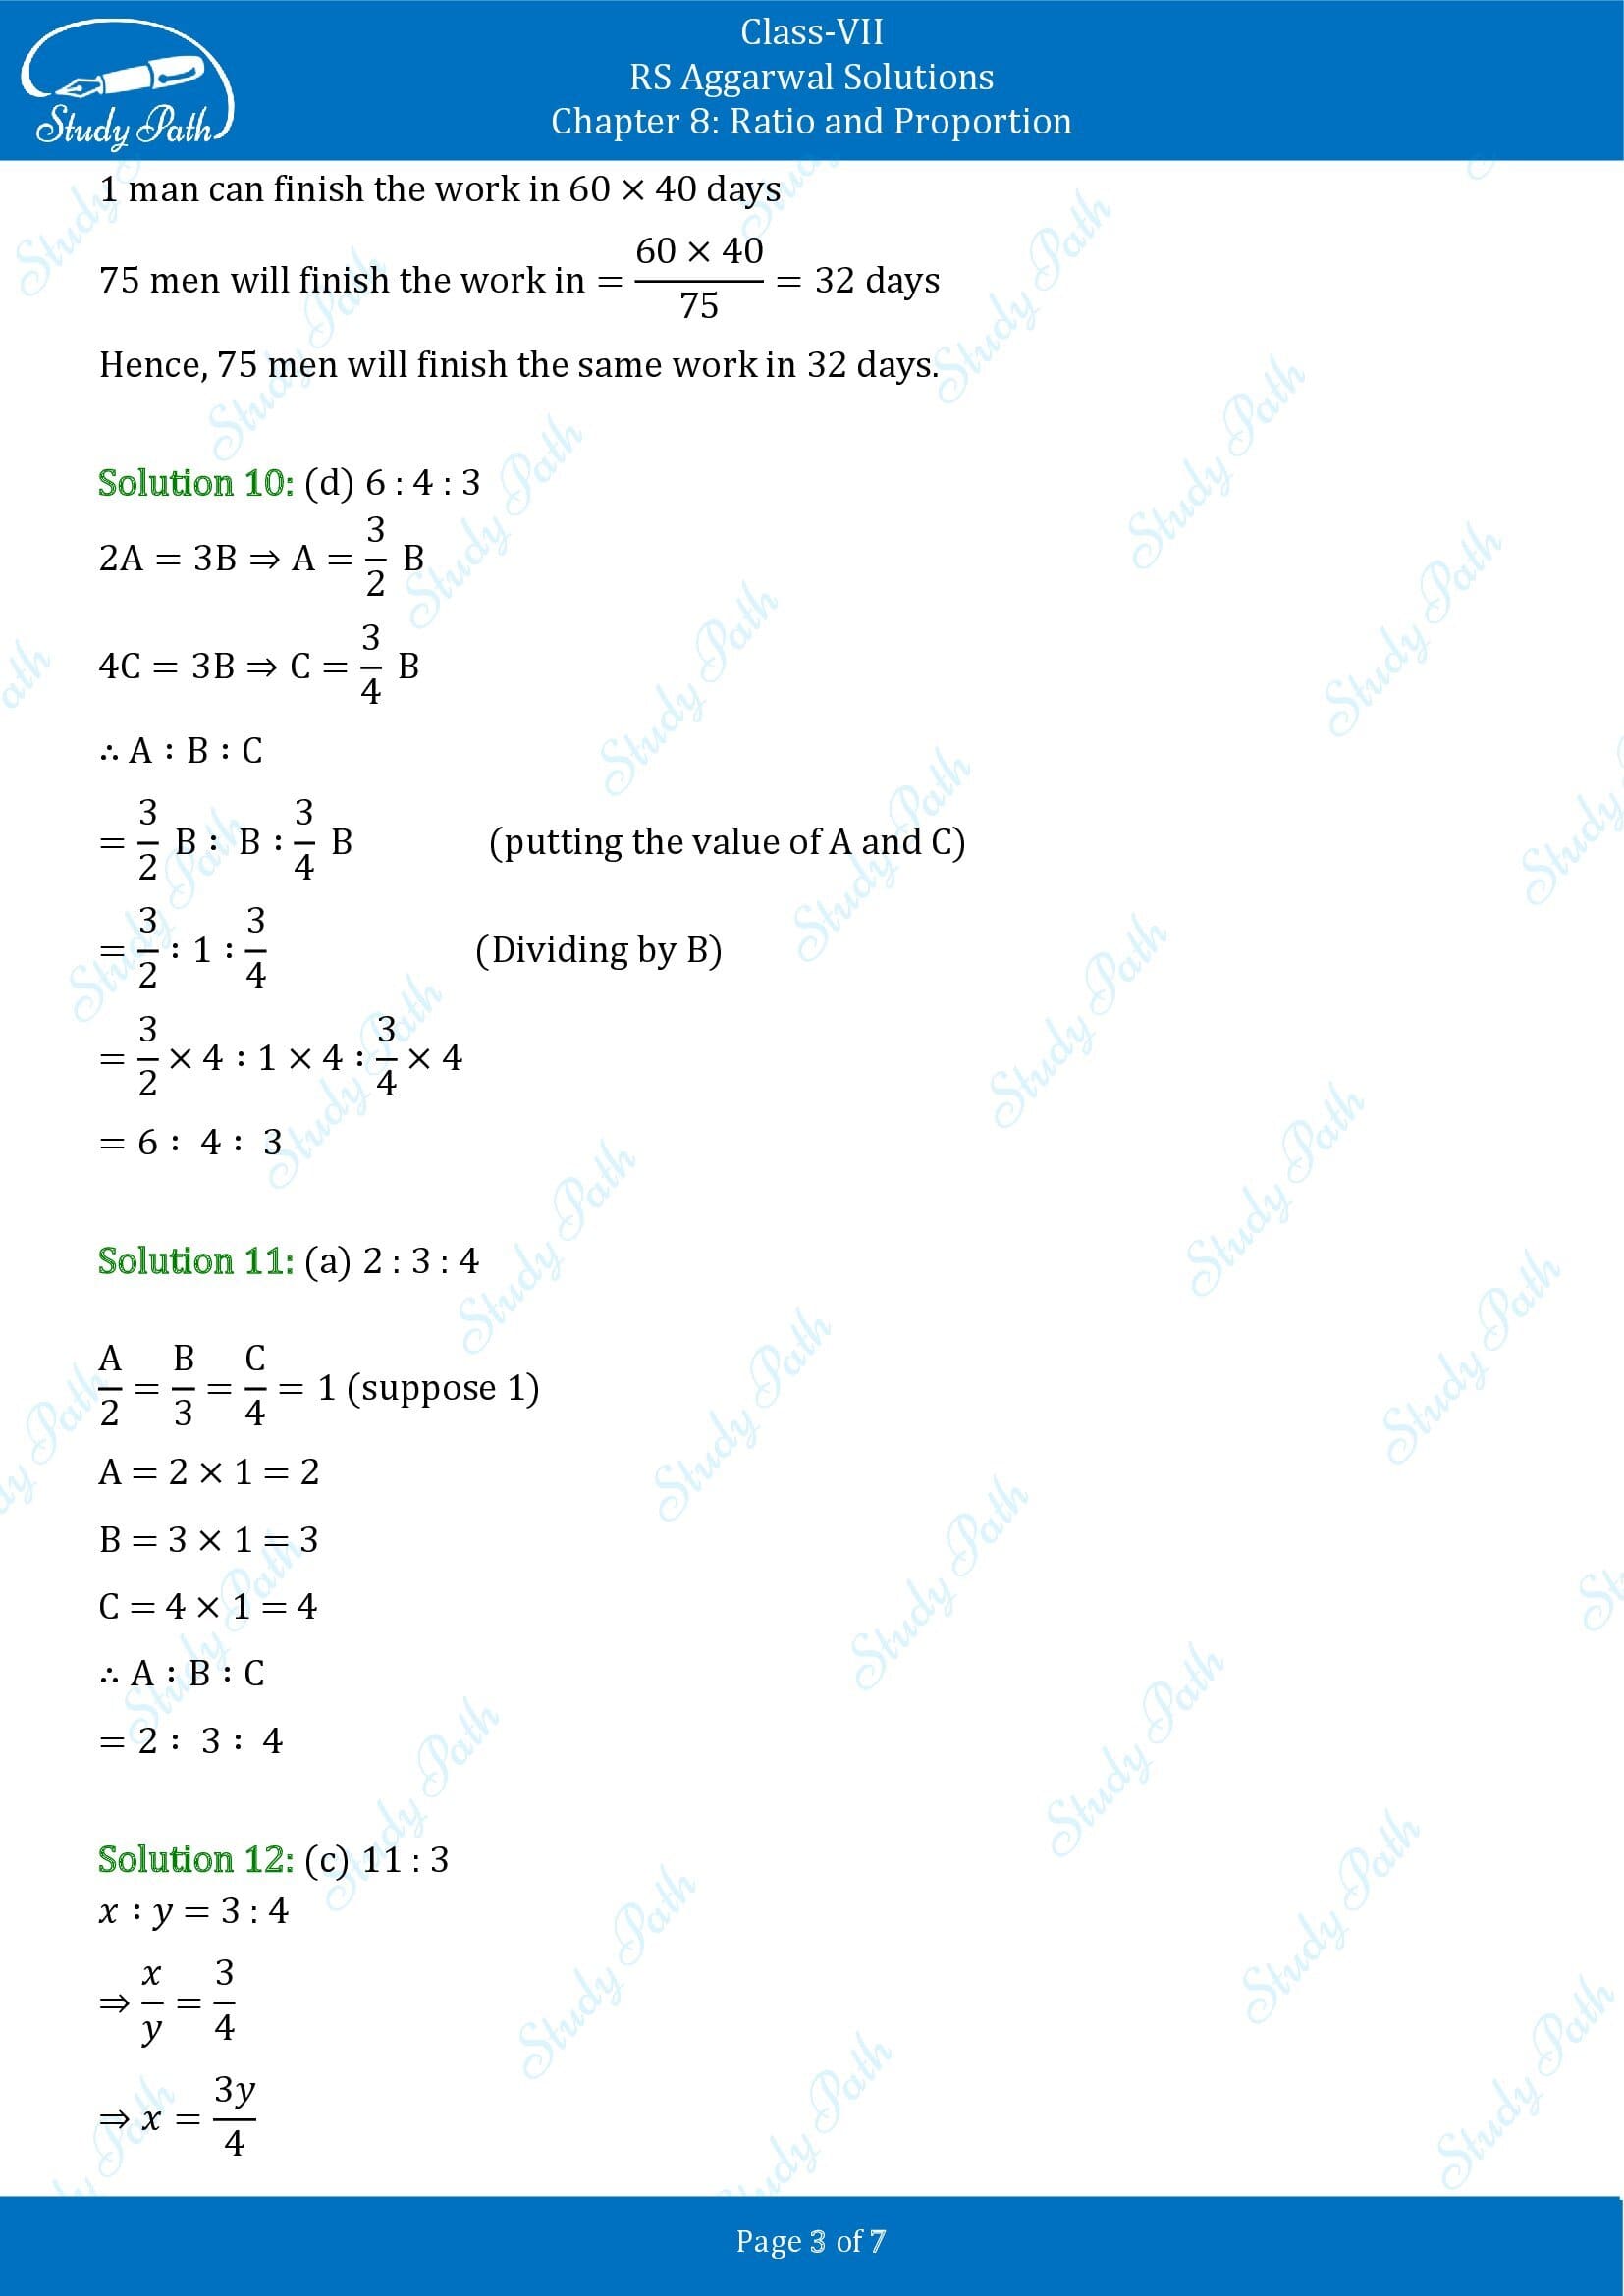 RS Aggarwal Solutions Class 7 Chapter 8 Ratio and Proportion Test Paper 00003